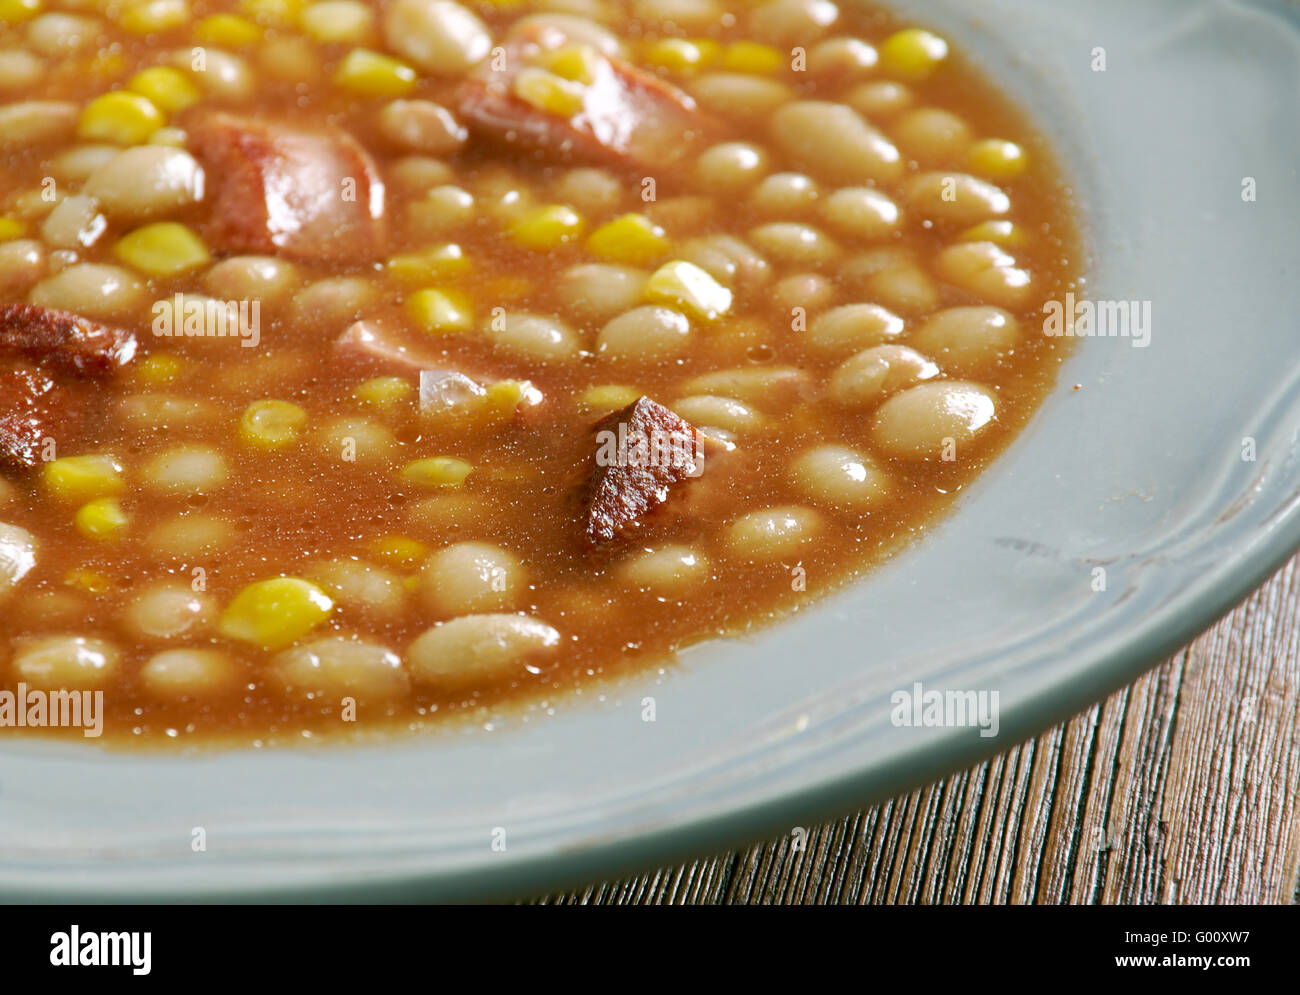 Tihove - Stew of corn beans and peanut butter.African cuisine Stock Photo -  Alamy